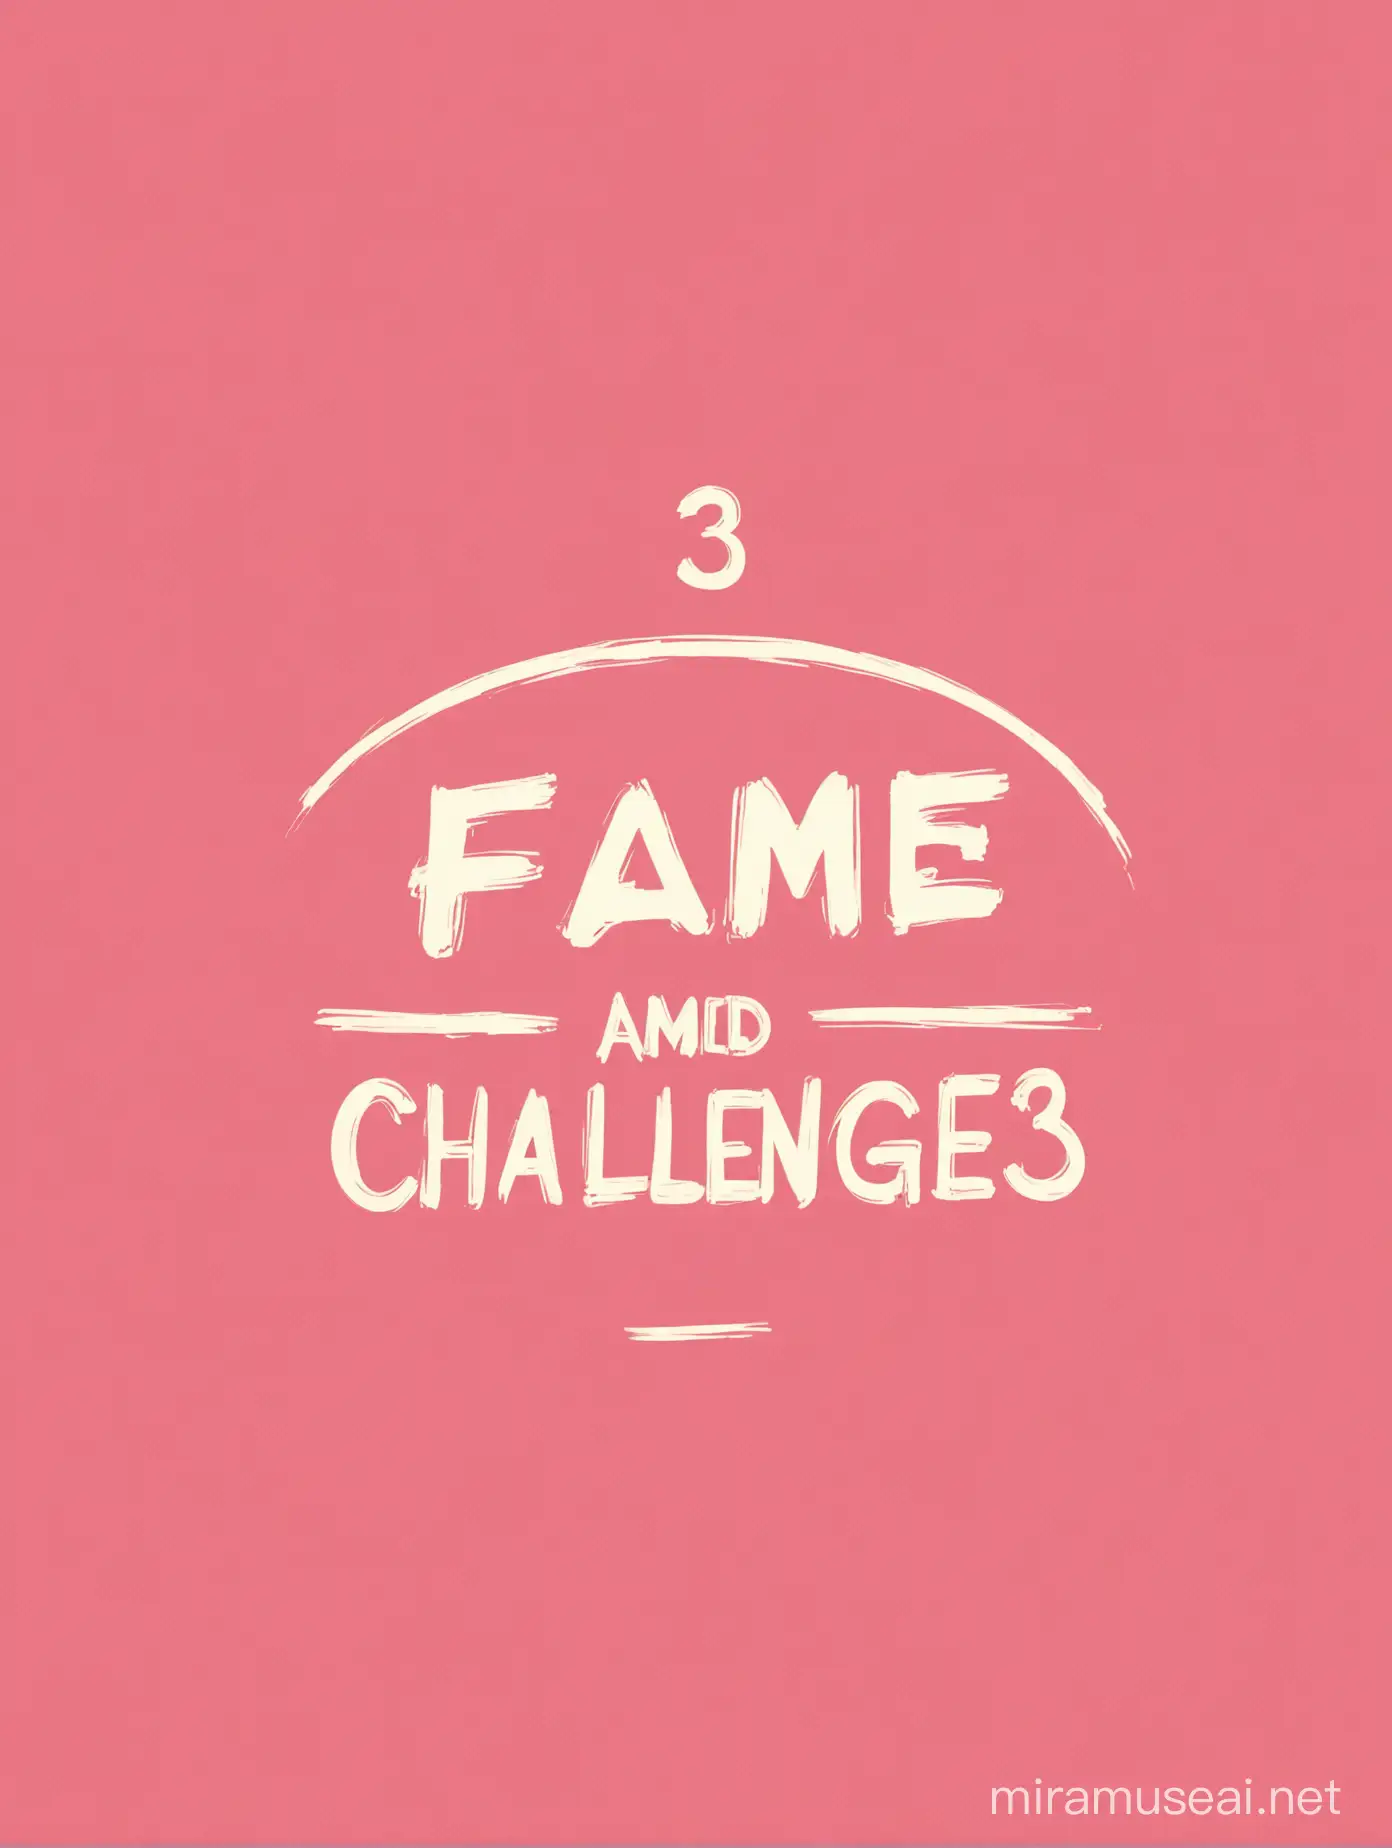 Chapter 3: Fame and Challenges
